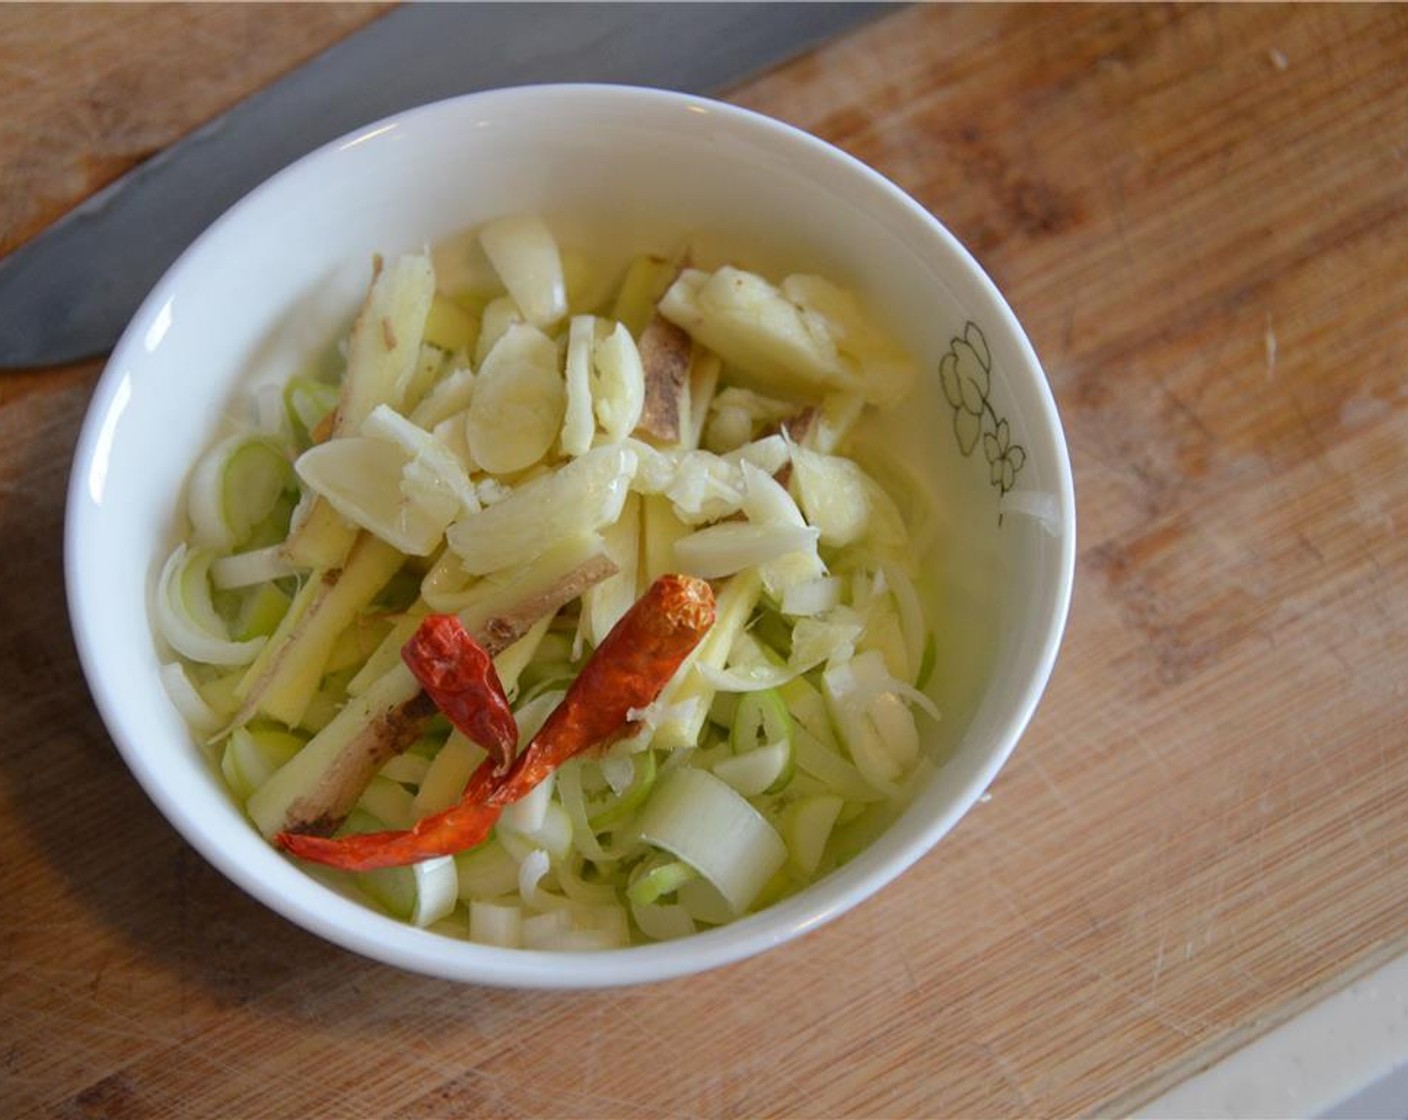 step 4 Combine the leek, garlic, ginger and Dried Chili Peppers (2) in a bowl.